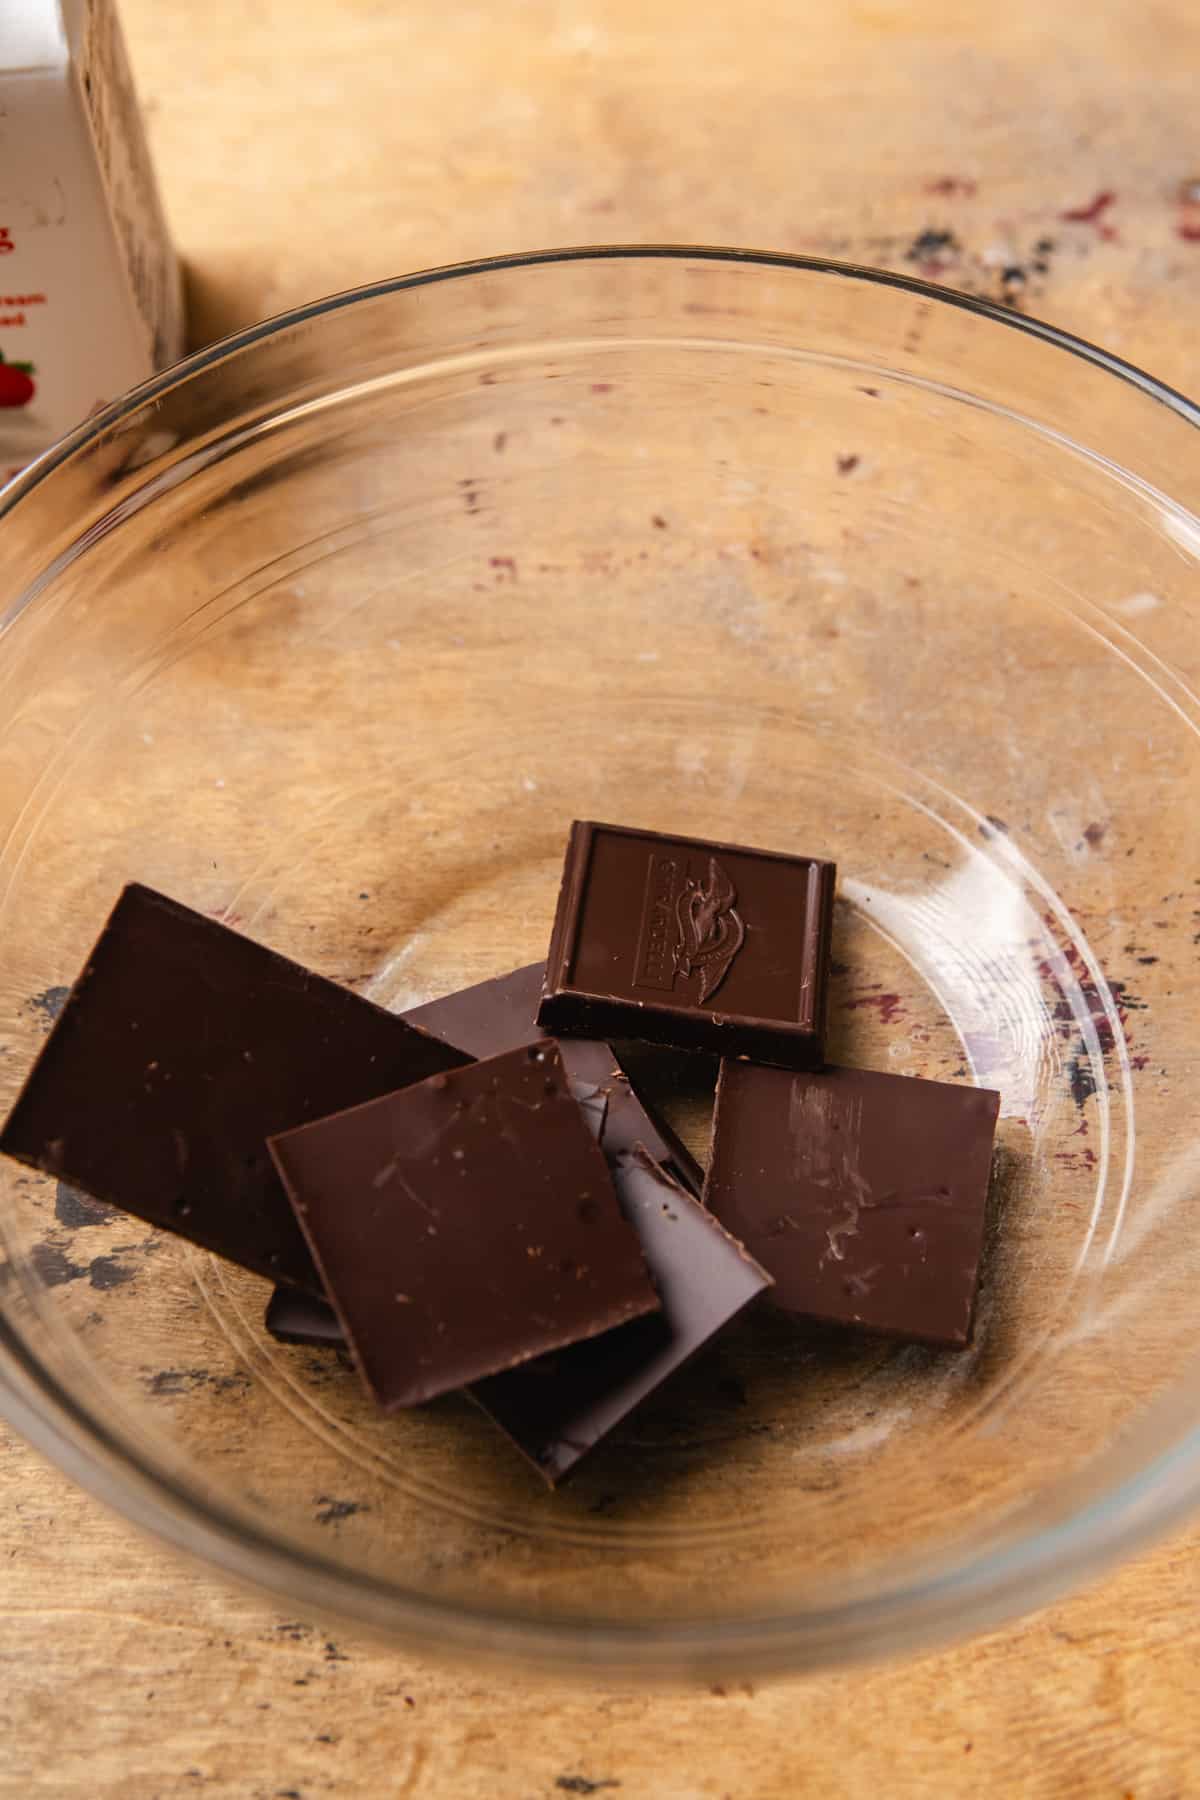 Chocolate squares in a glass mixing bowl.